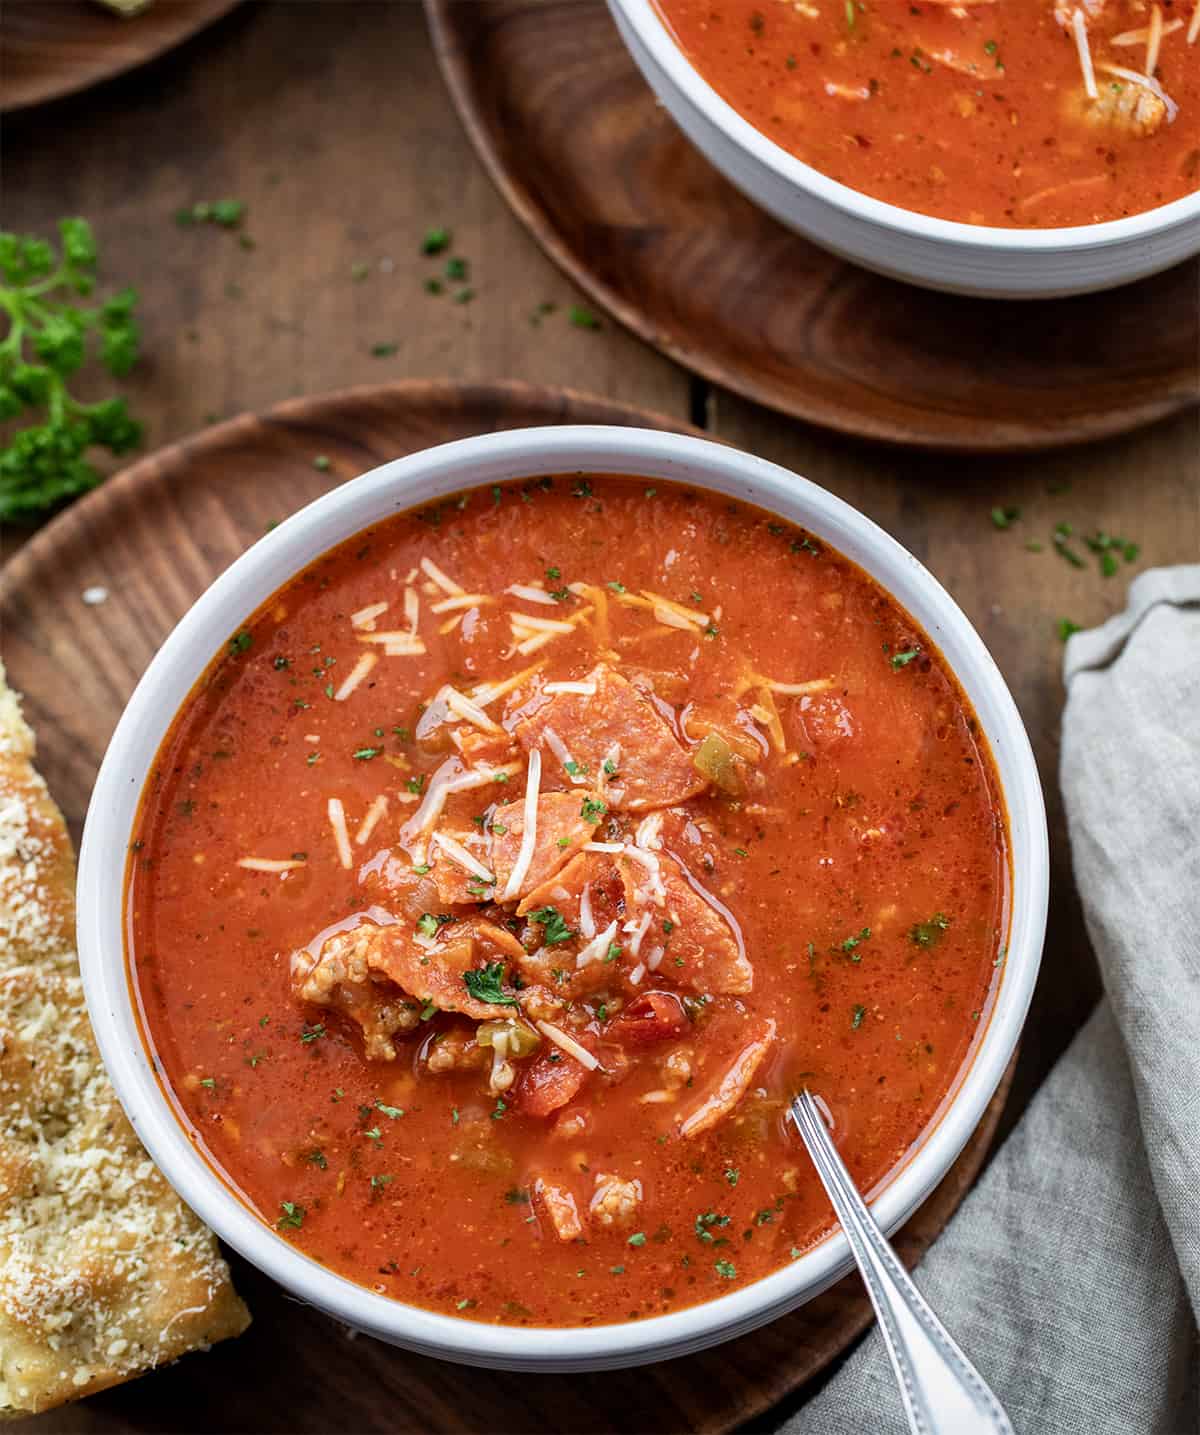 Bowls of Pizza Soup on a wooden table with focaccia.